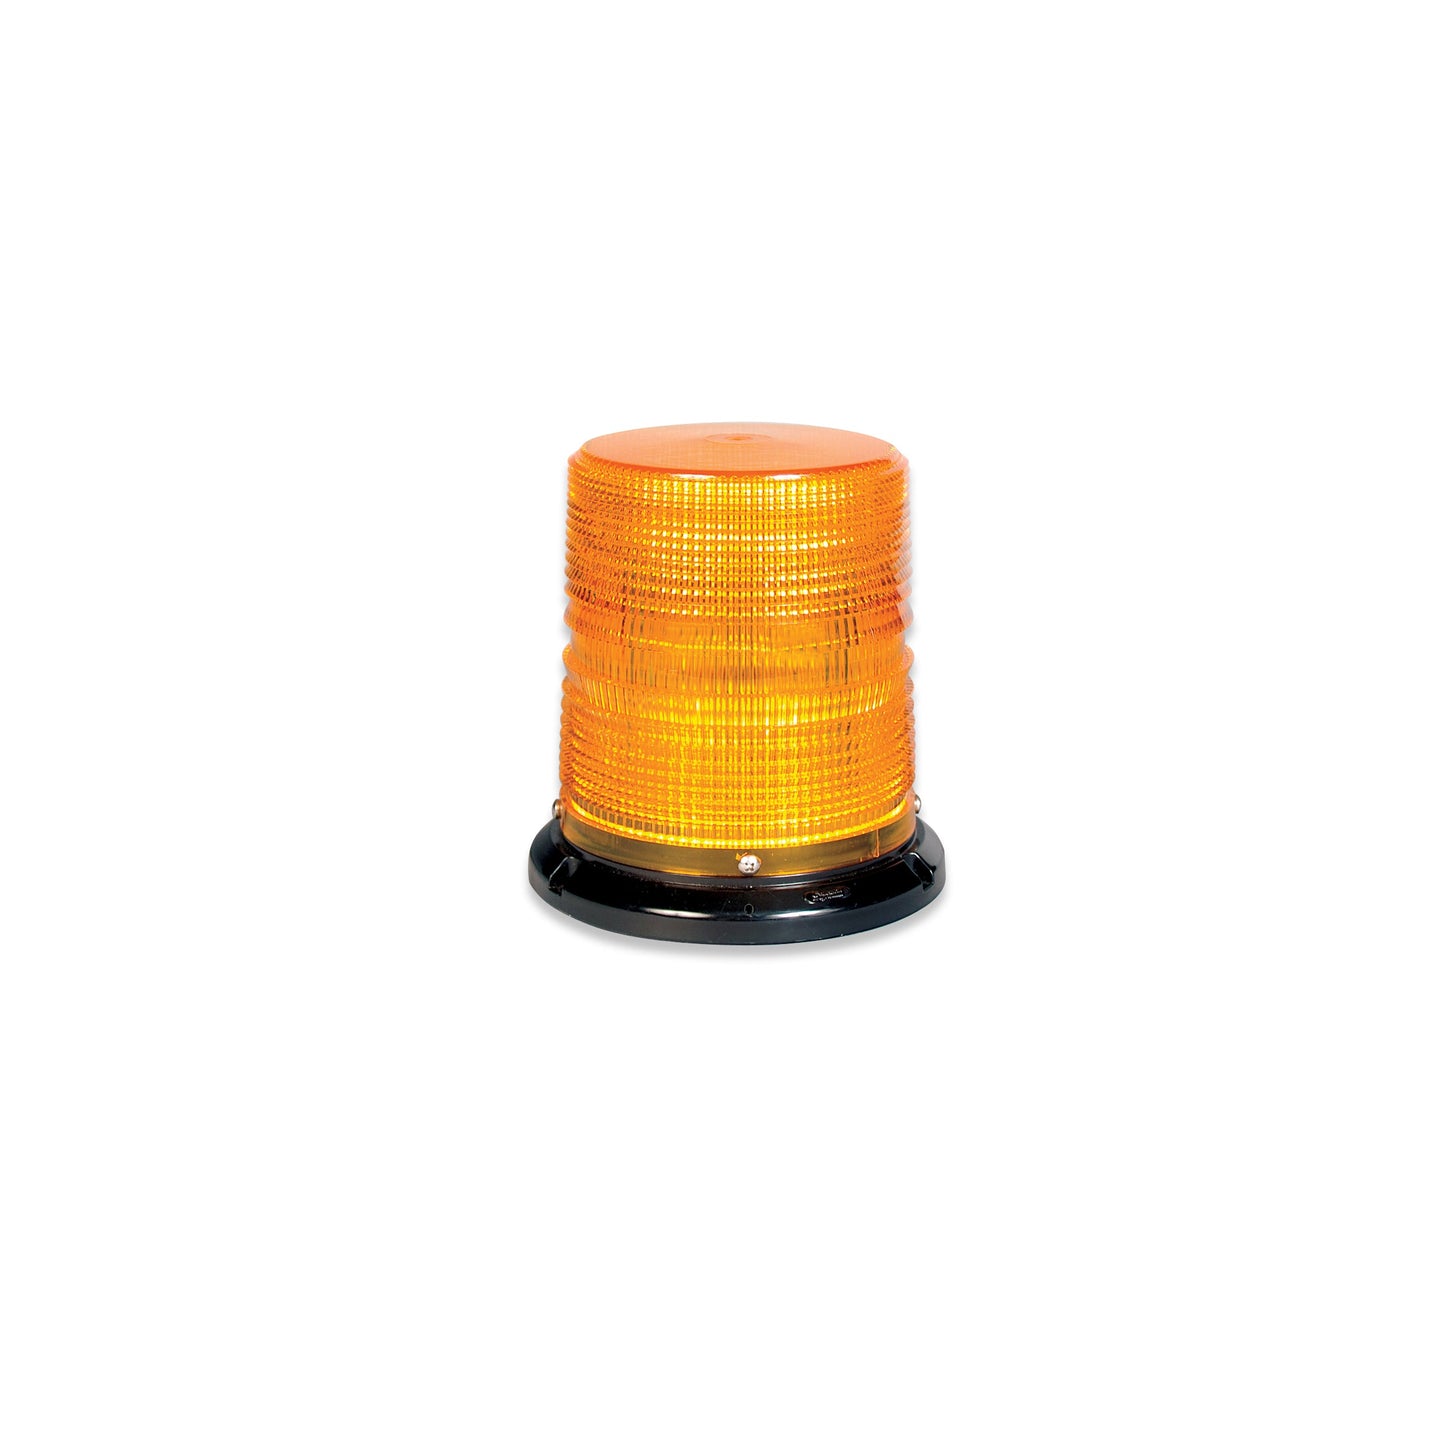 Soundoff Signal ELB45BML+RR 4500 Series Led Beacon, 10-30V, Sae J845 Class 1 - Magnetic Mount, 4" Red Dome/ Red Leds